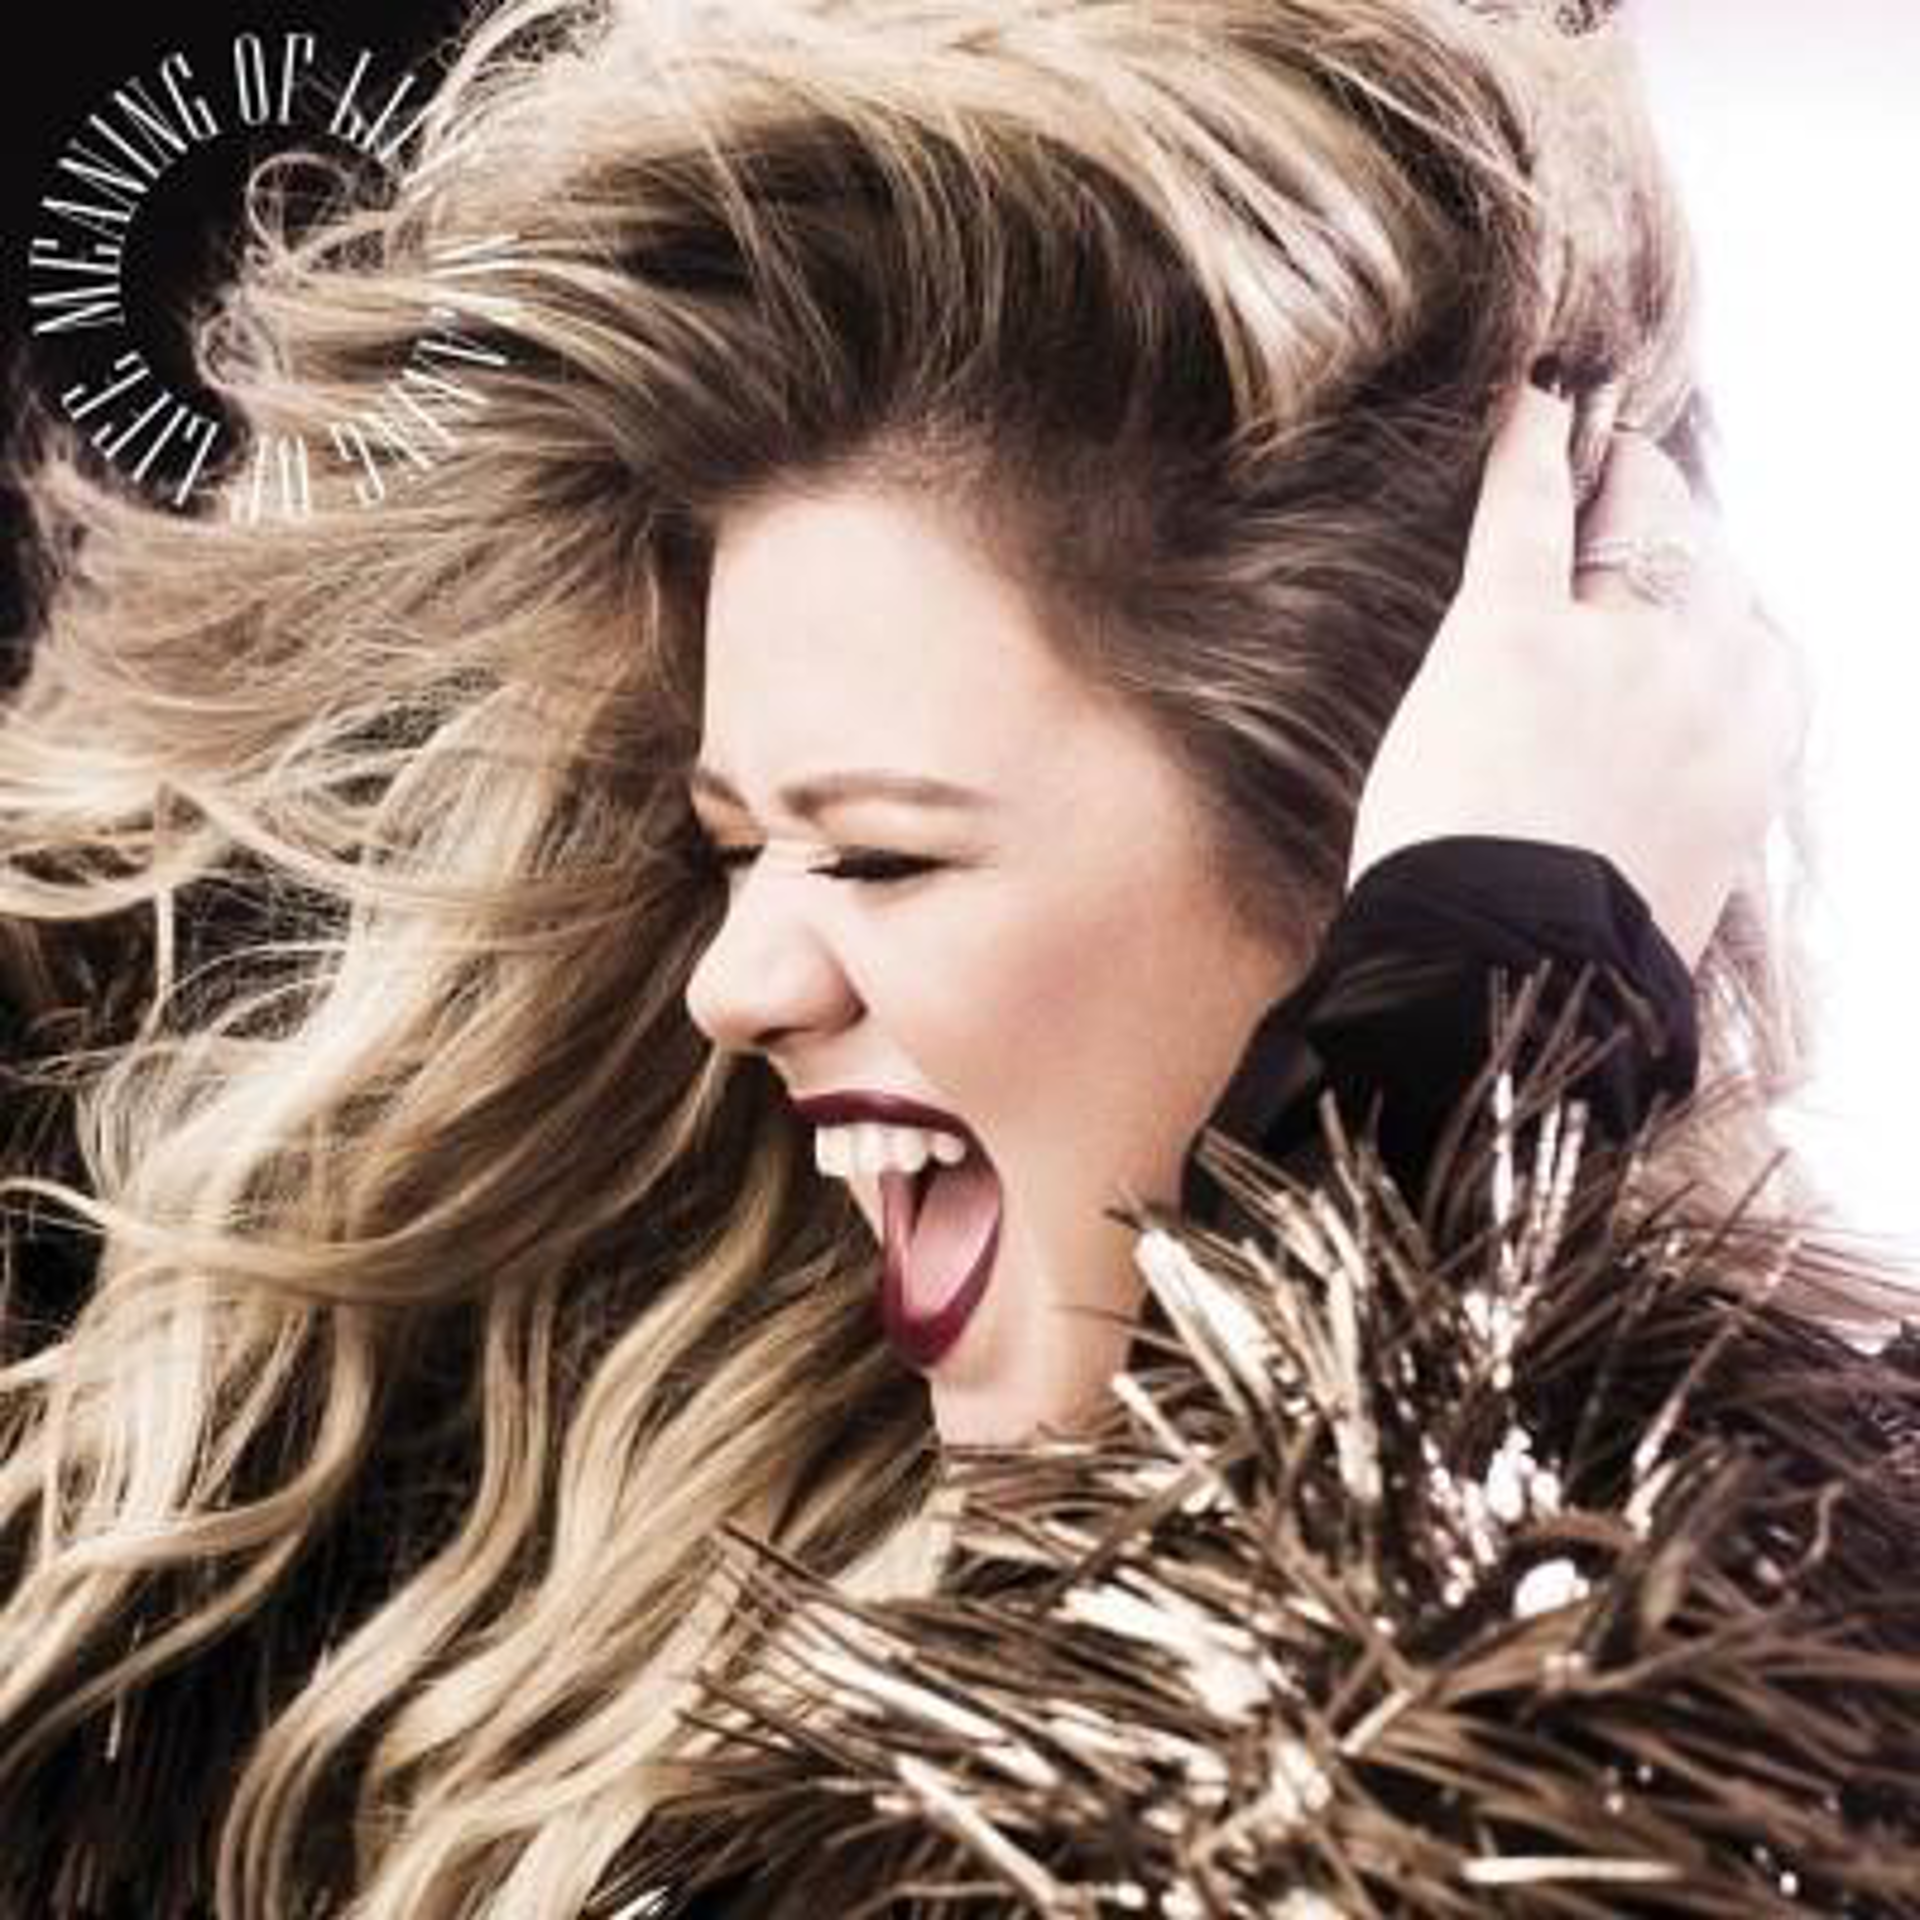 KELLY CLARKSON, Meaning of Life